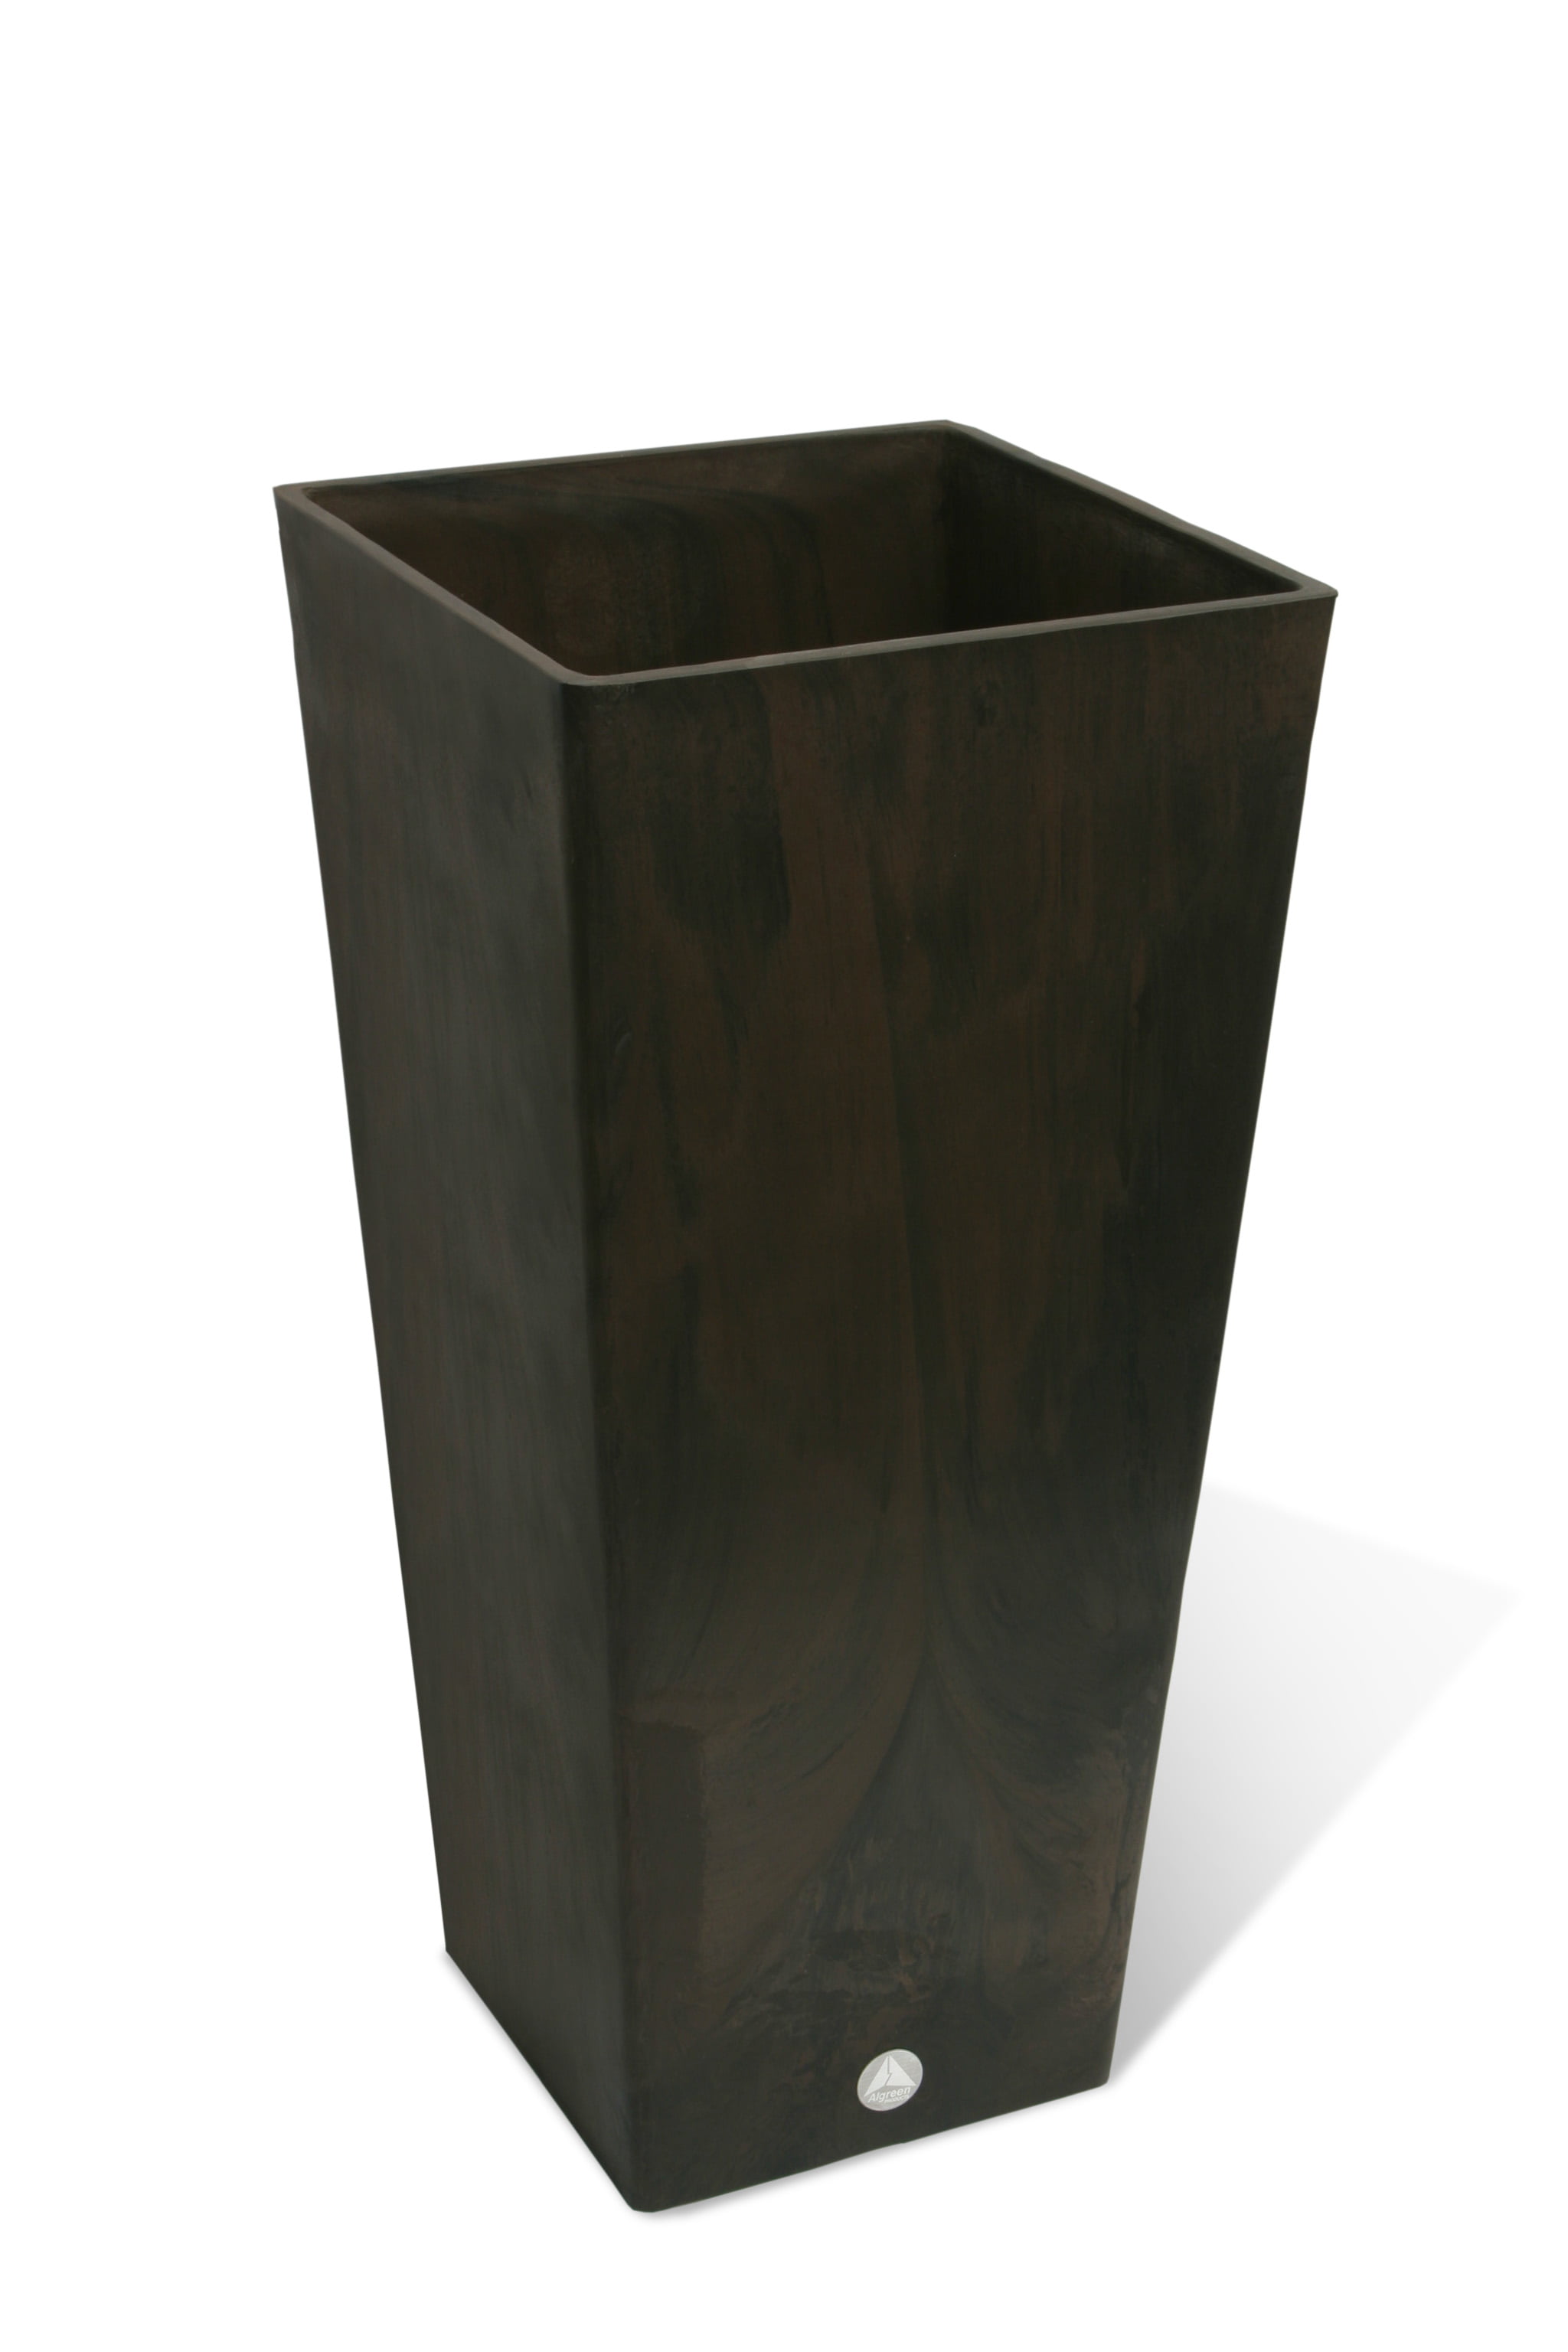 Algreen Valencia Square Planter, 13-Inch Width x 28-Inch Height, with Plant  Shelf Insert, Chocolate Marble＿並行輸入品